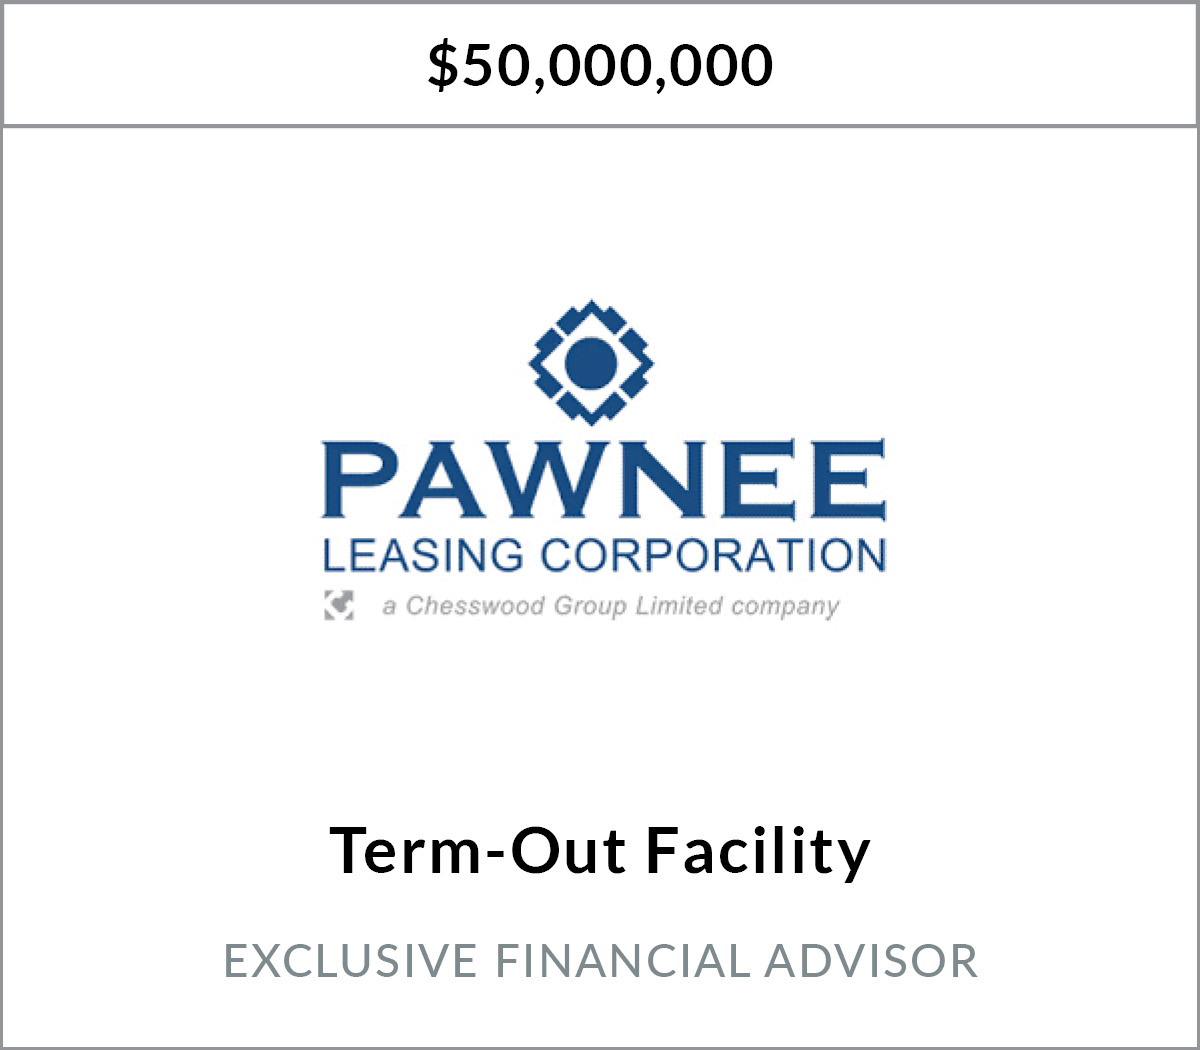 Bryant Park Capital Acts as Exclusive Financial Advisor to Pawnee In Its Second U.S. Securitization